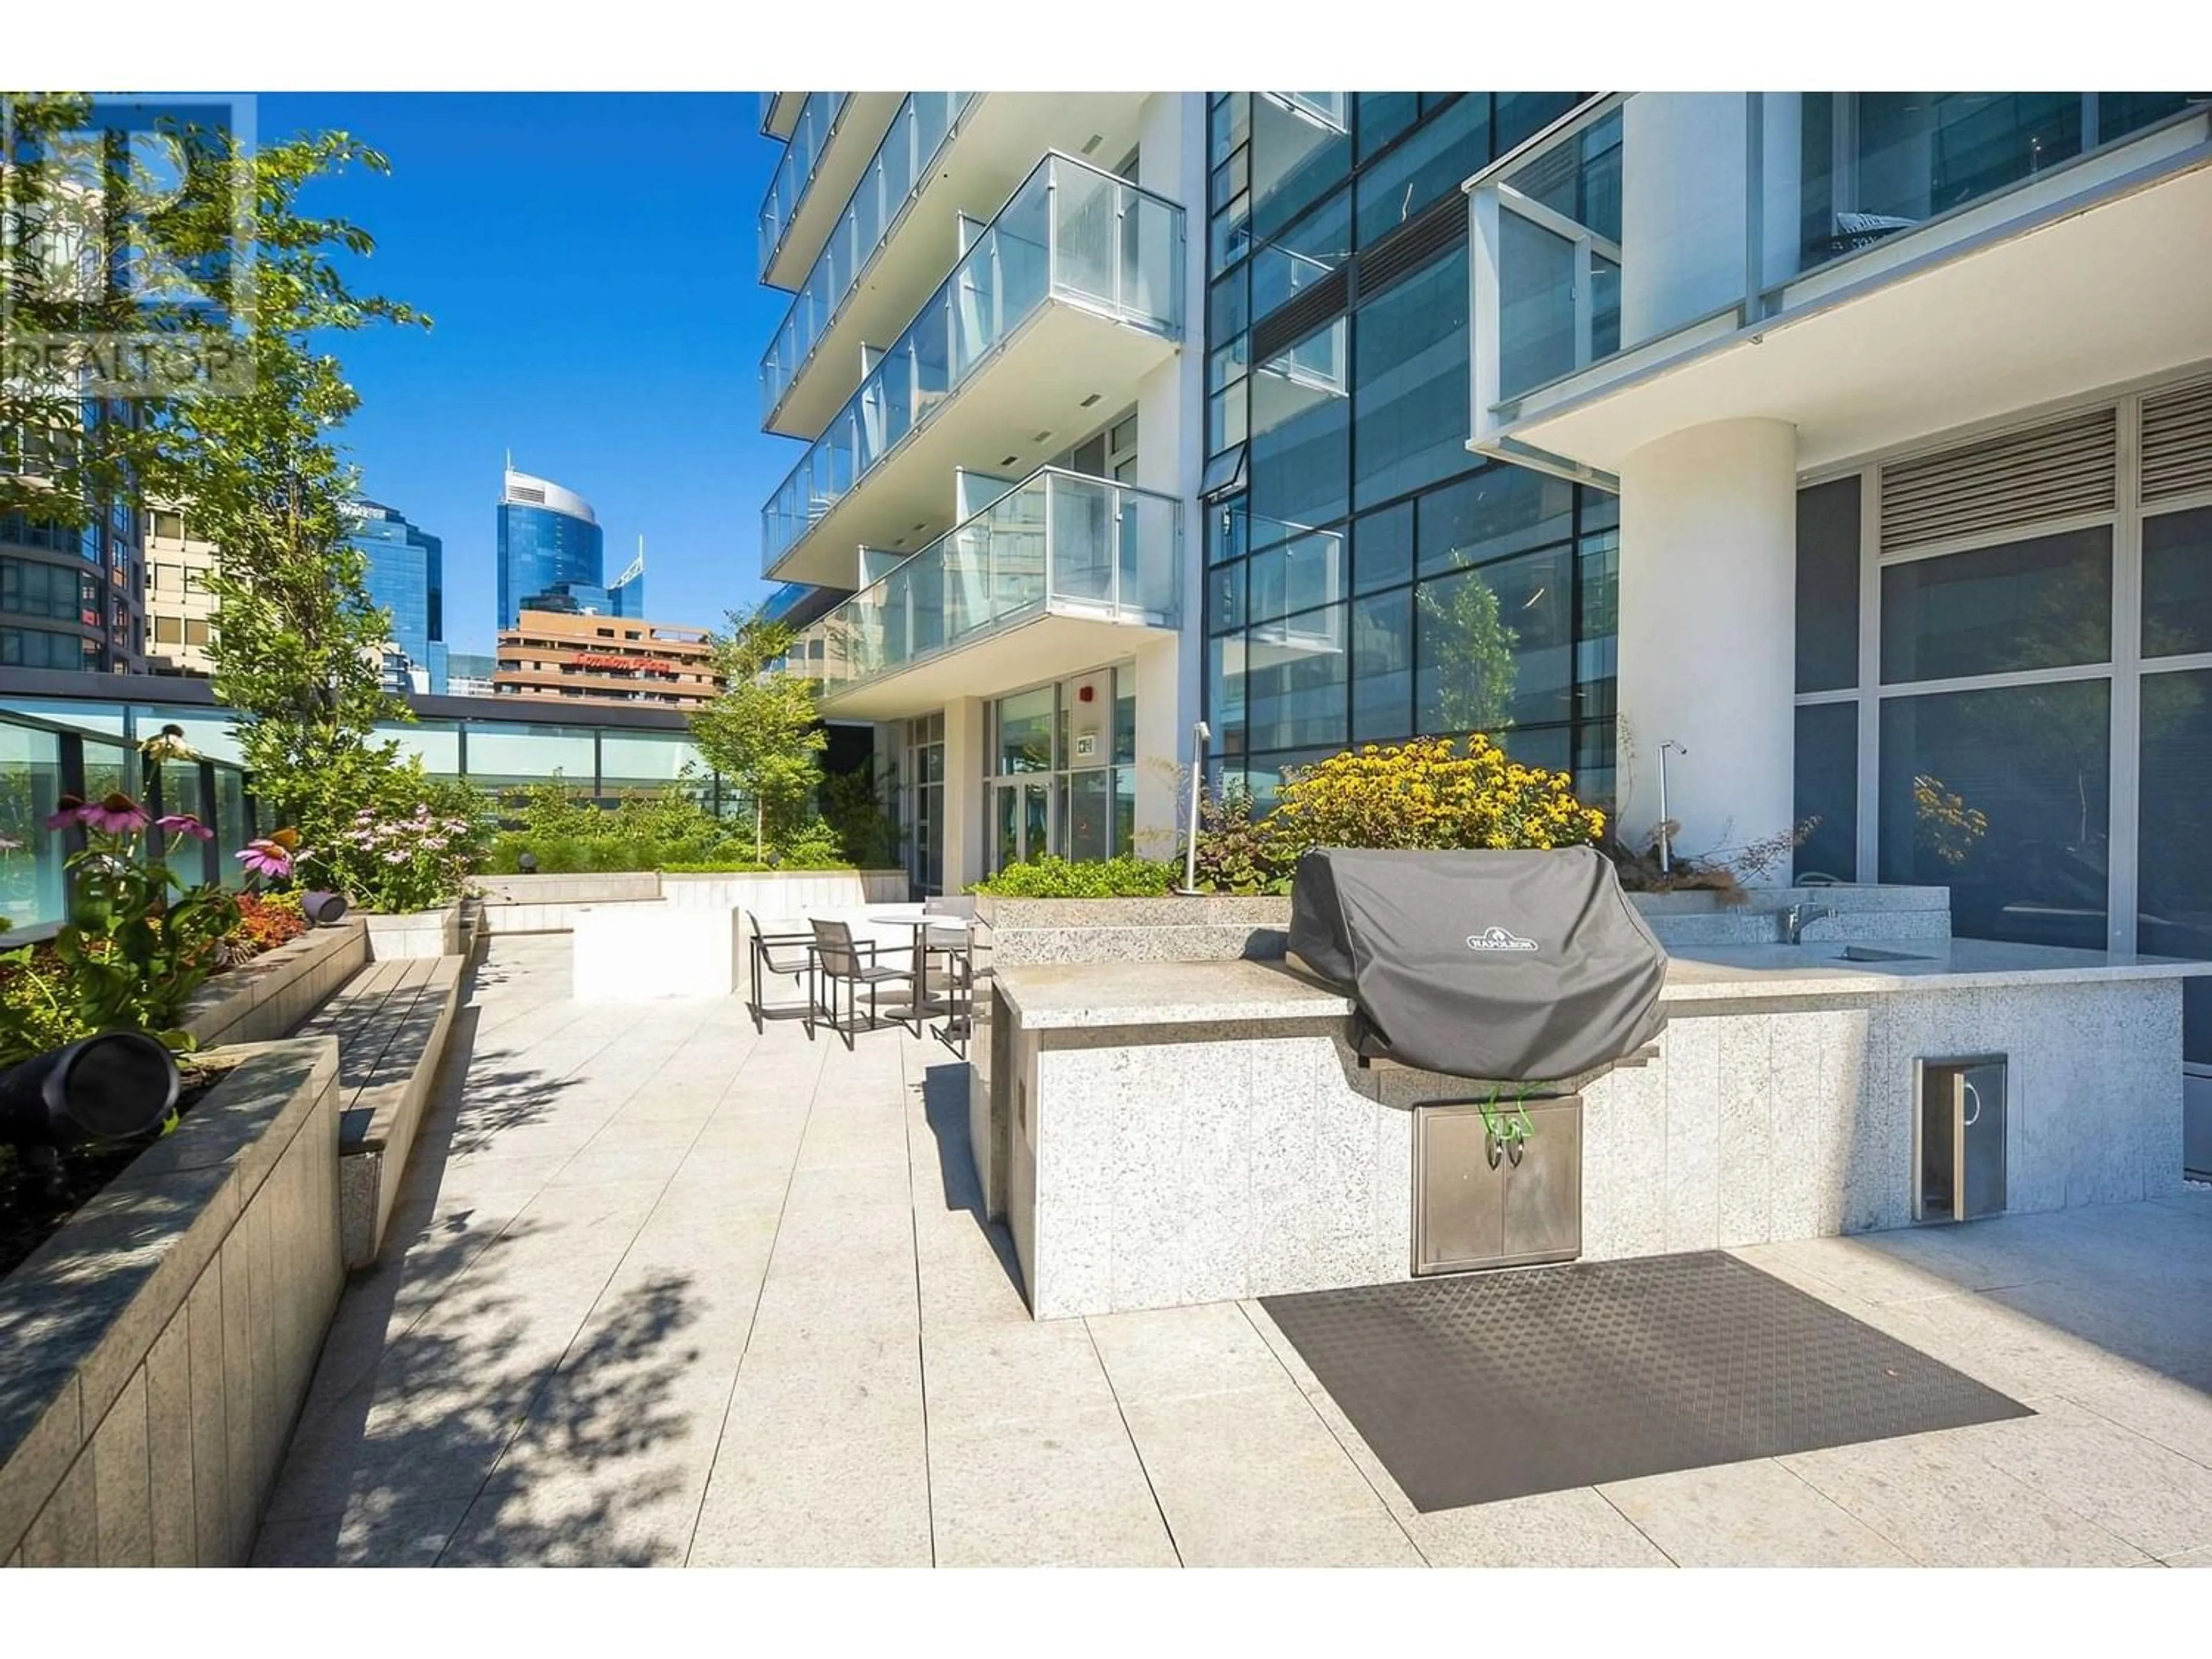 Patio for 1007 1289 HORNBY STREET, Vancouver British Columbia V6Z0G7